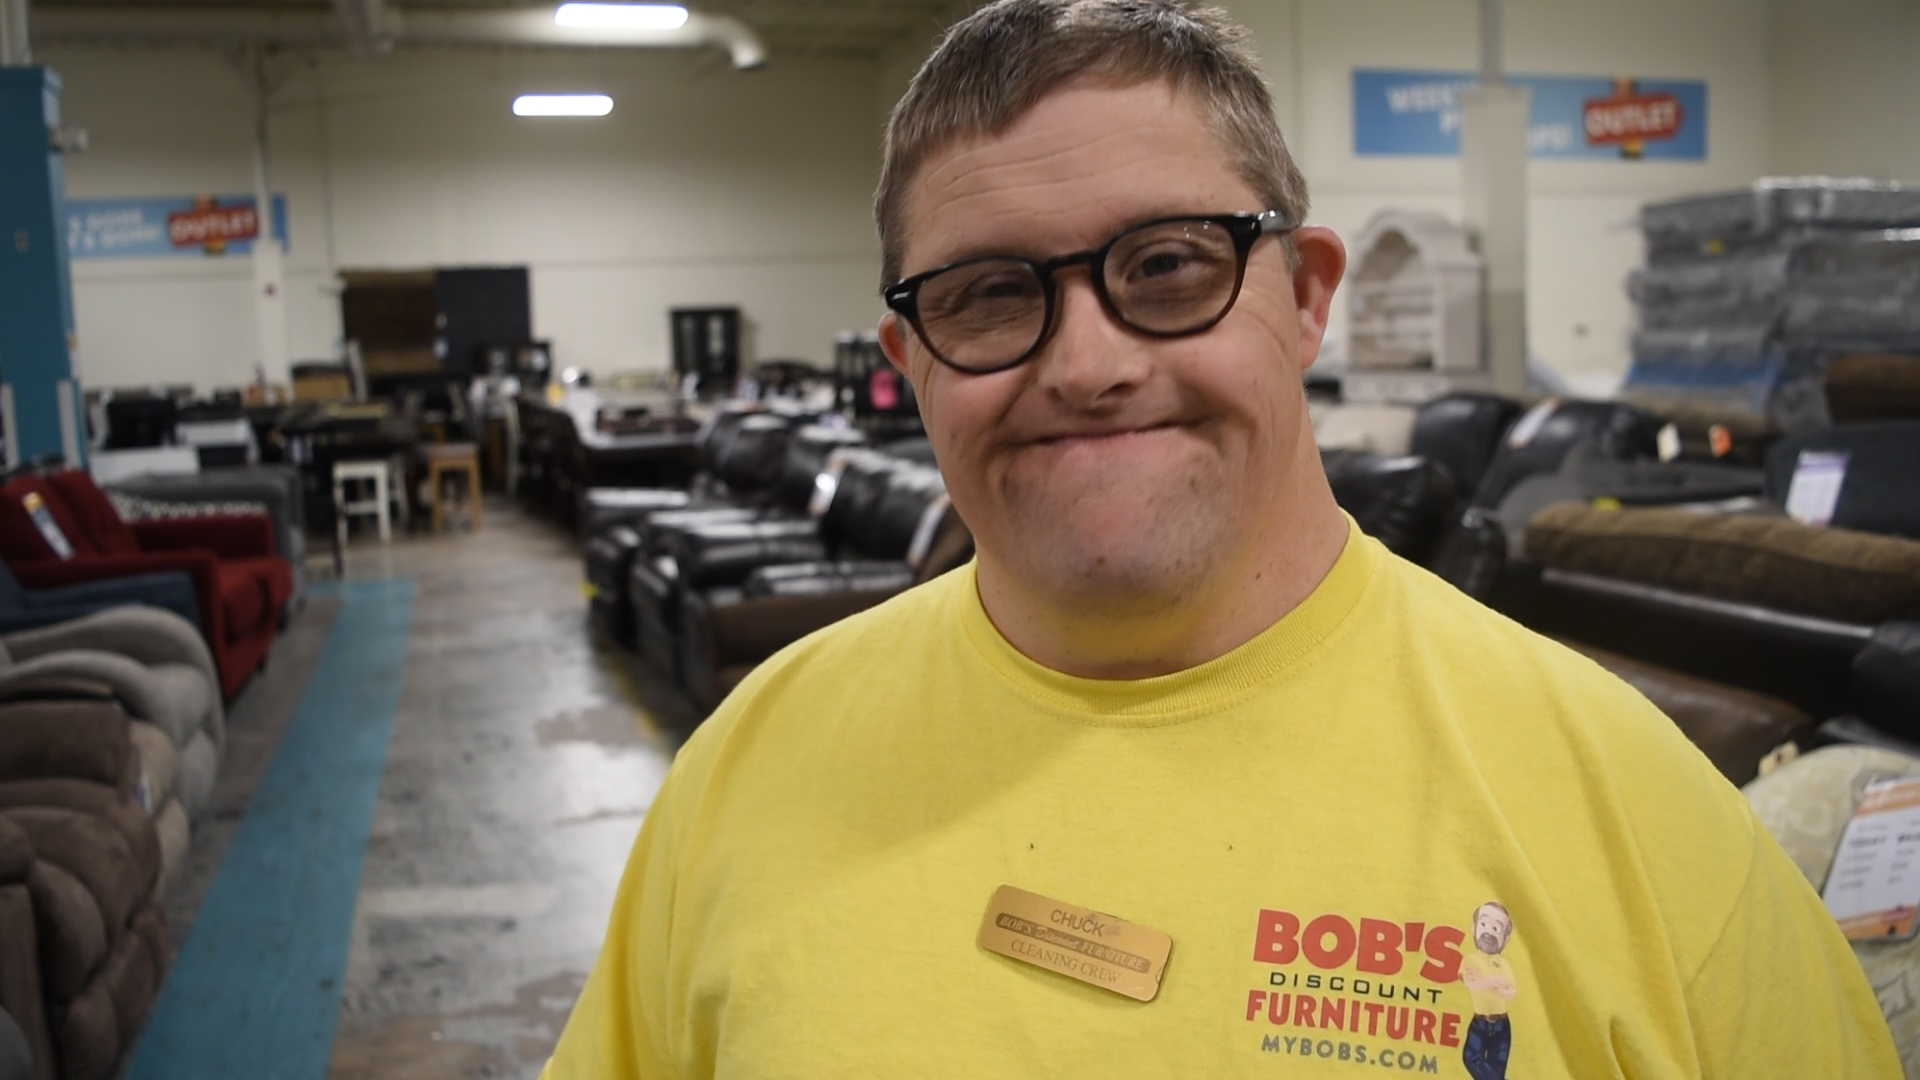 Chuck Yenkner has worked at Bob's Discount Furniture for over 16 years.